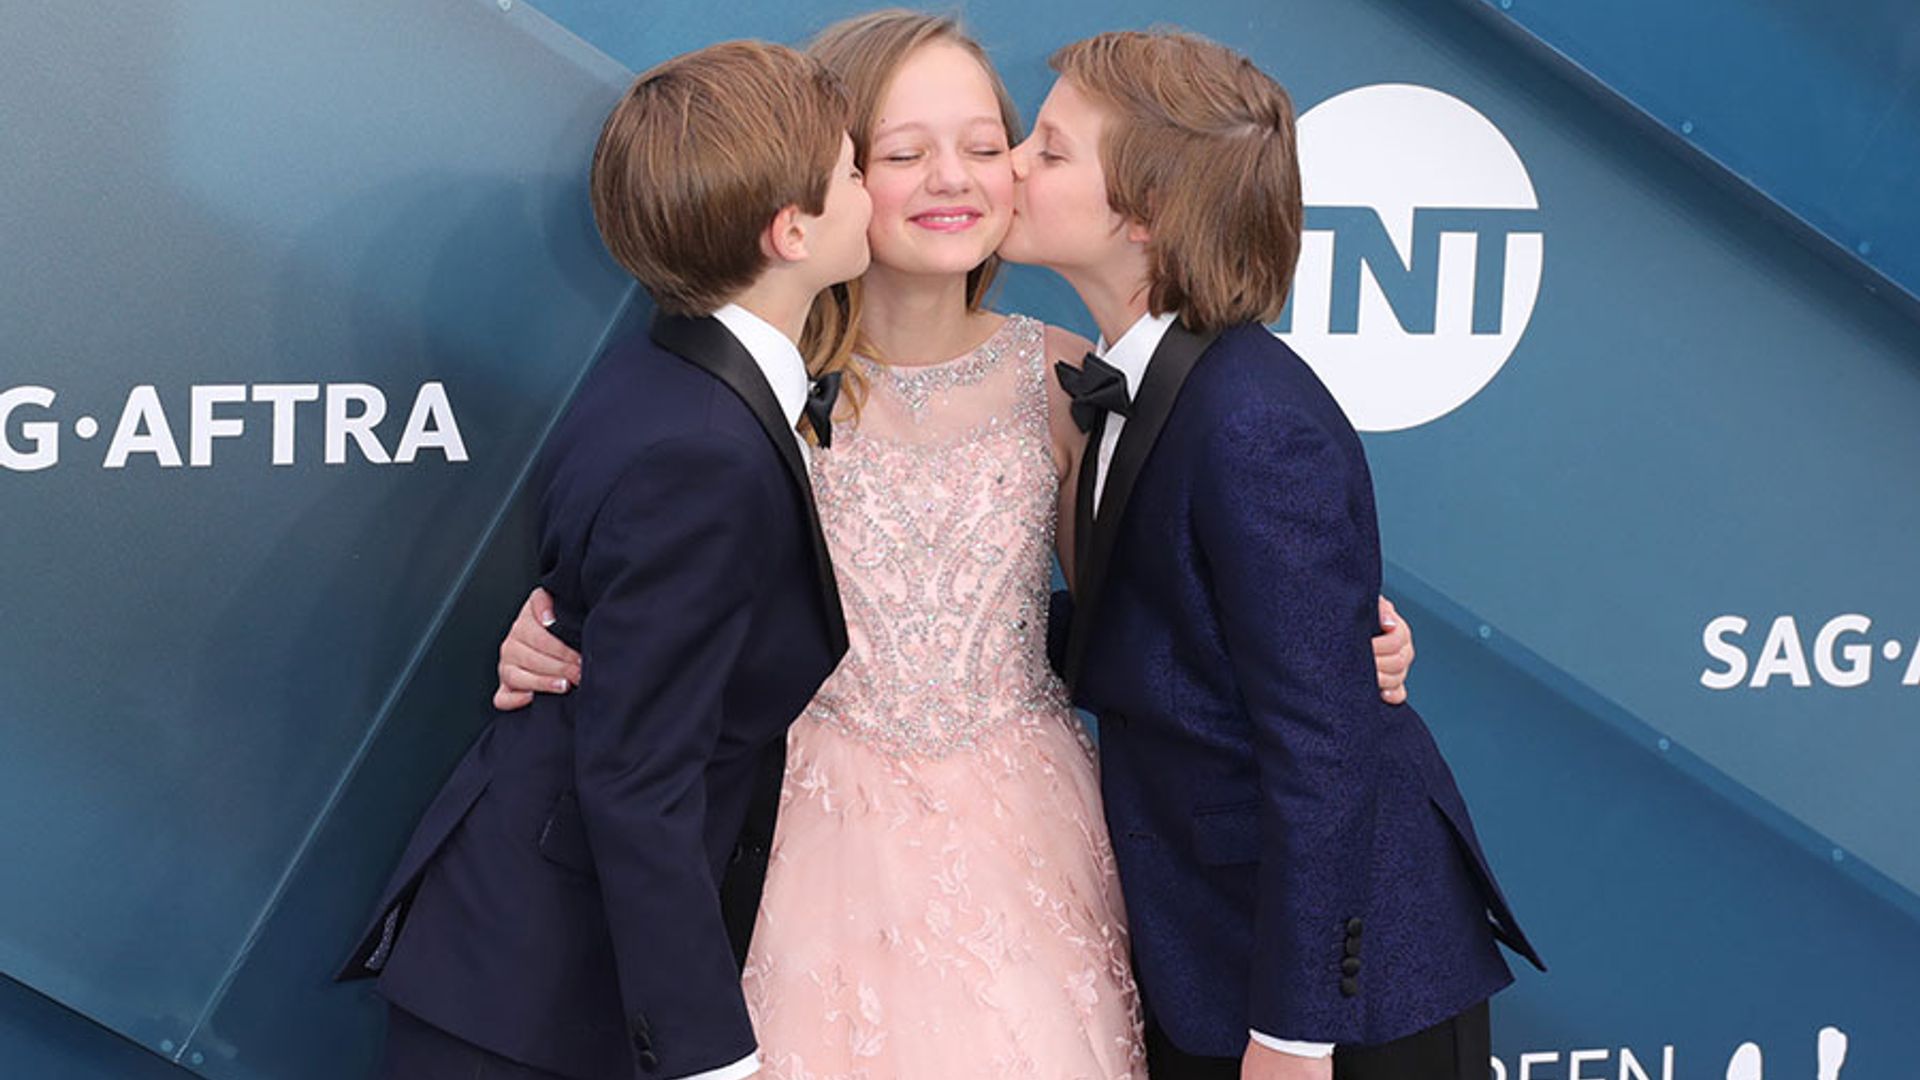 The cutest kids at the 2020 SAG Awards